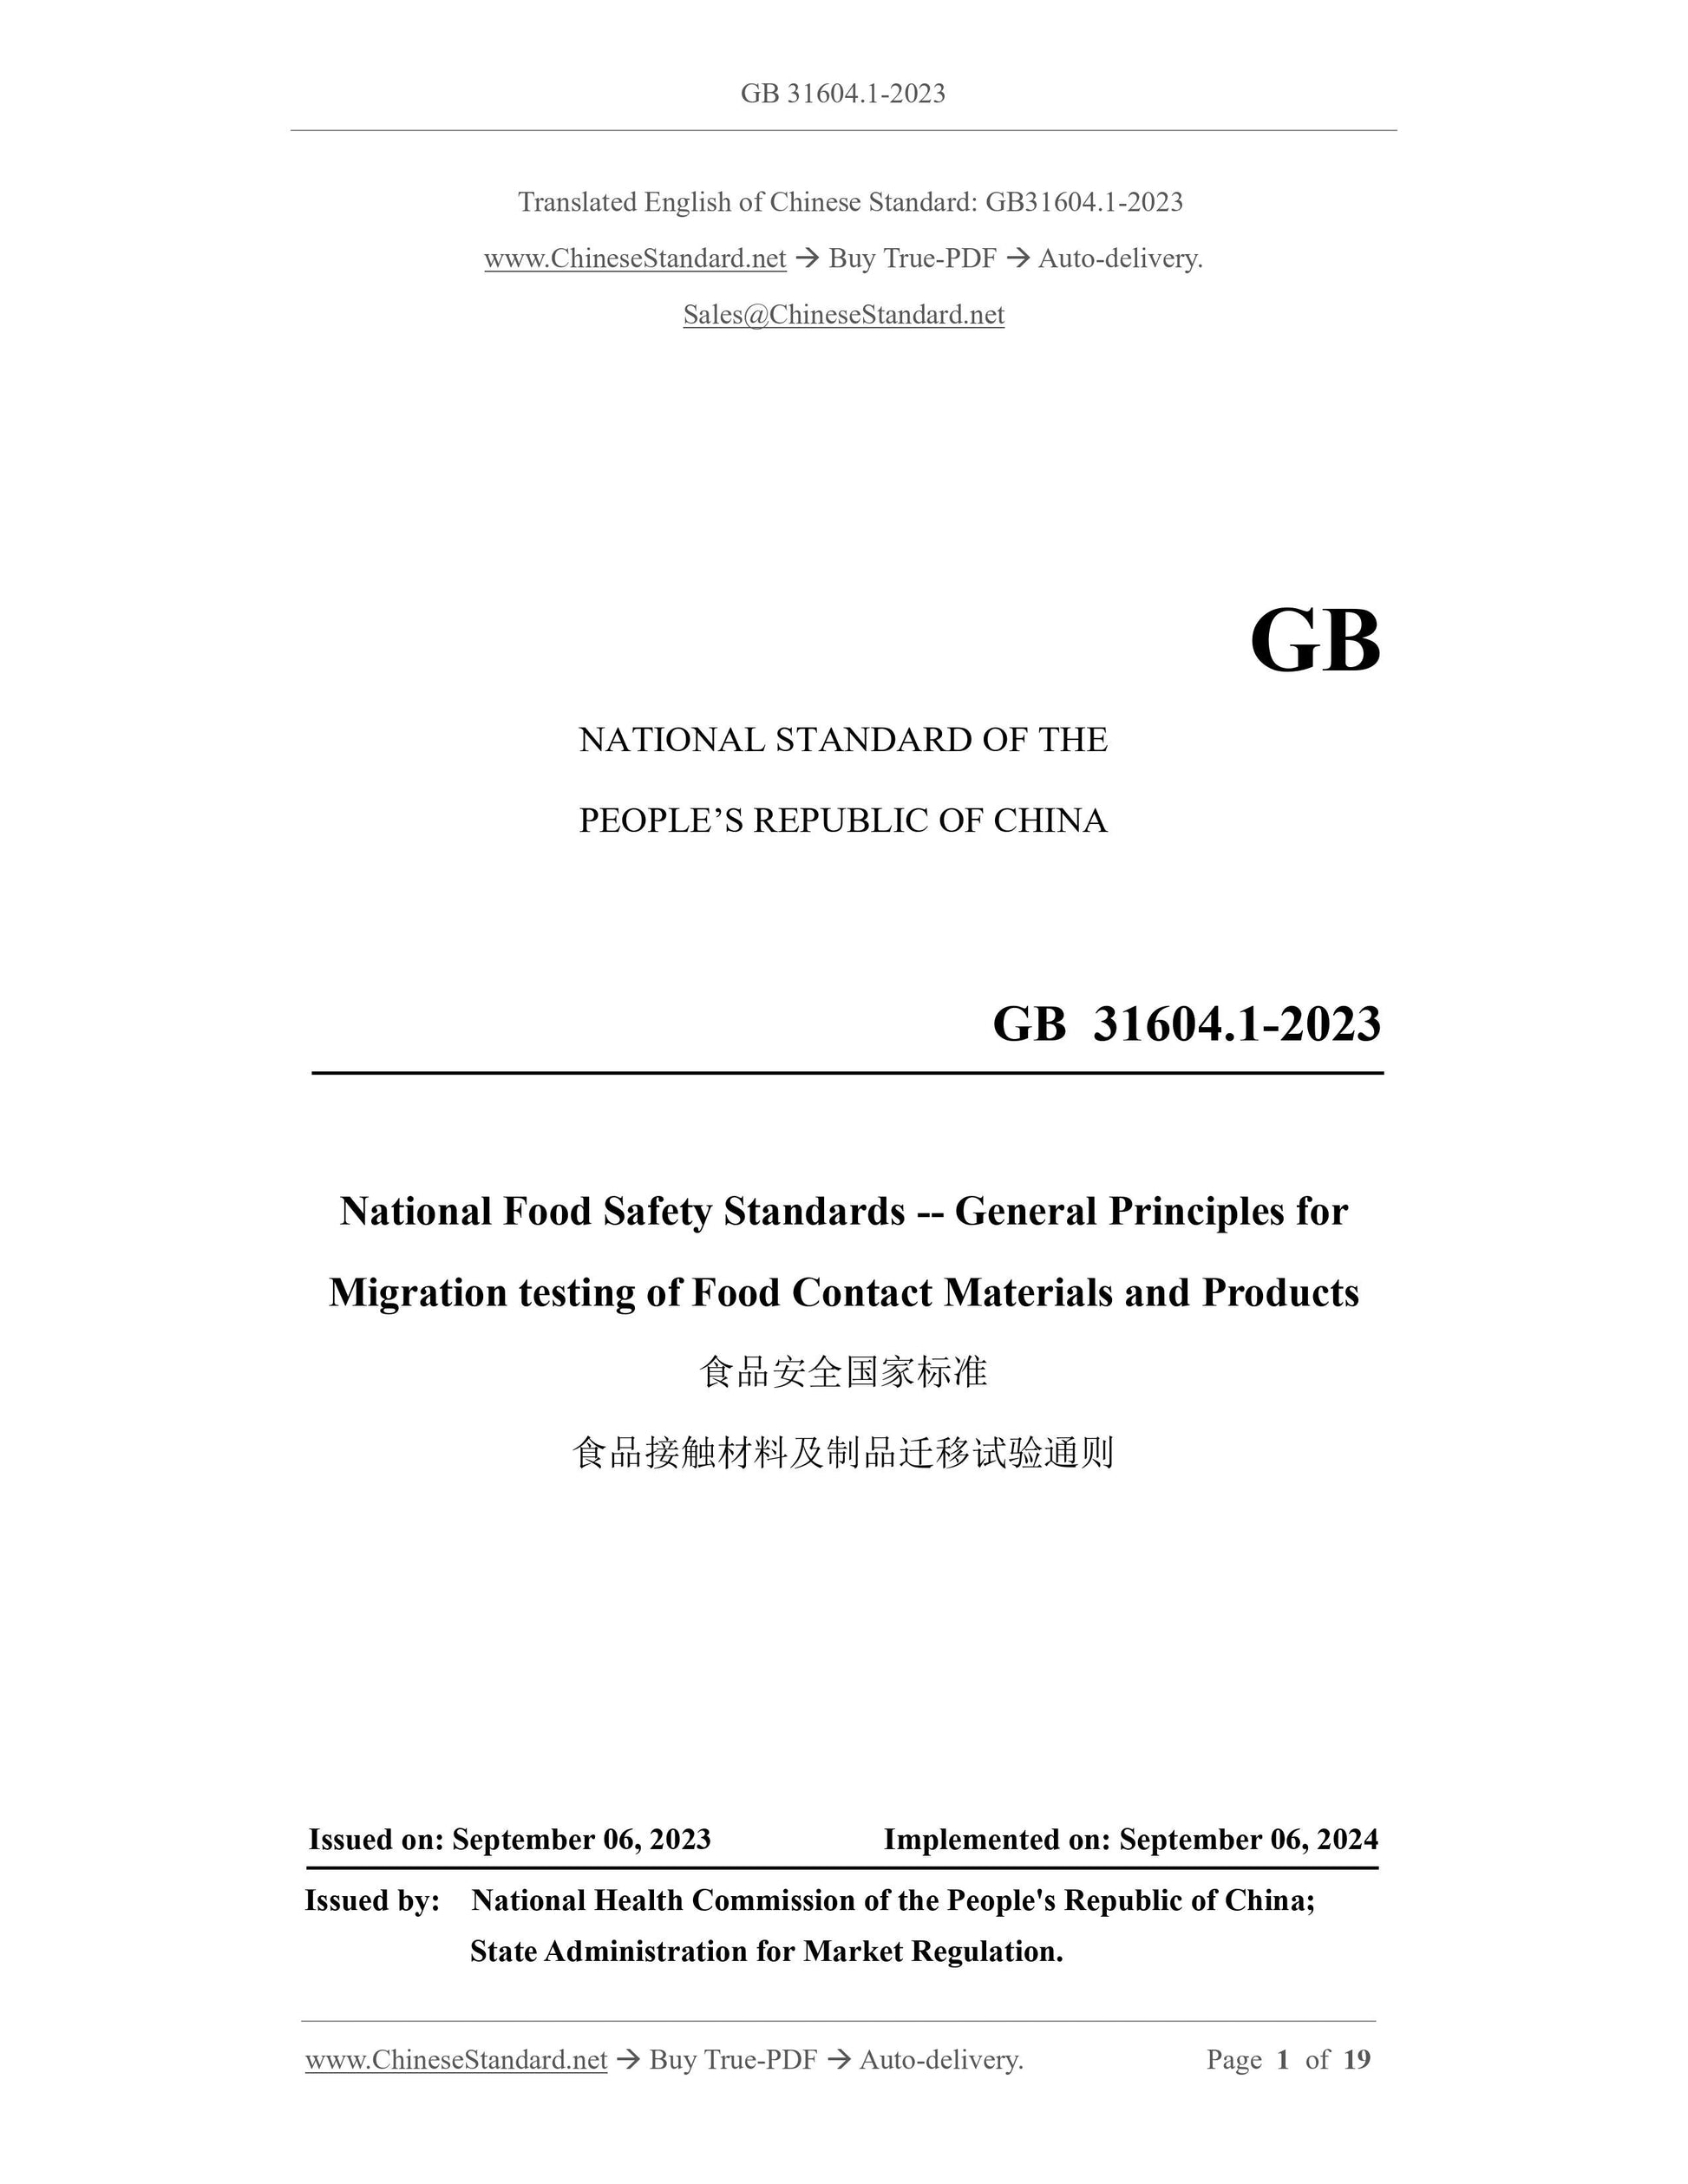 GB 31604.1-2023 Page 1